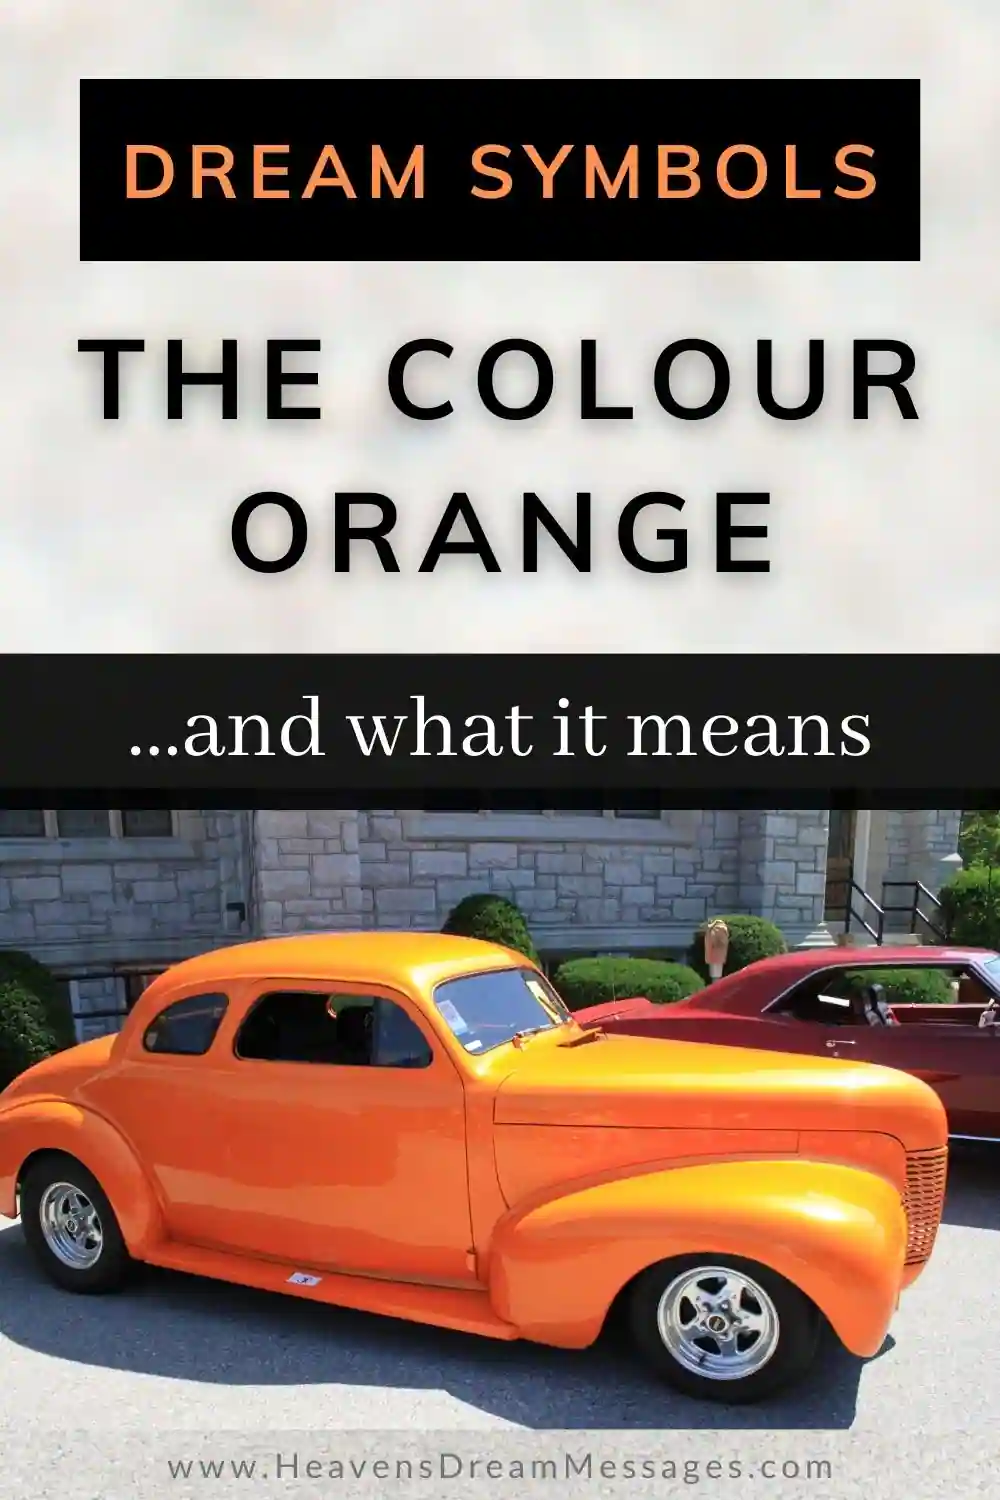 Picture of orange car, with text: Dream symbols: The colour orange and what it means